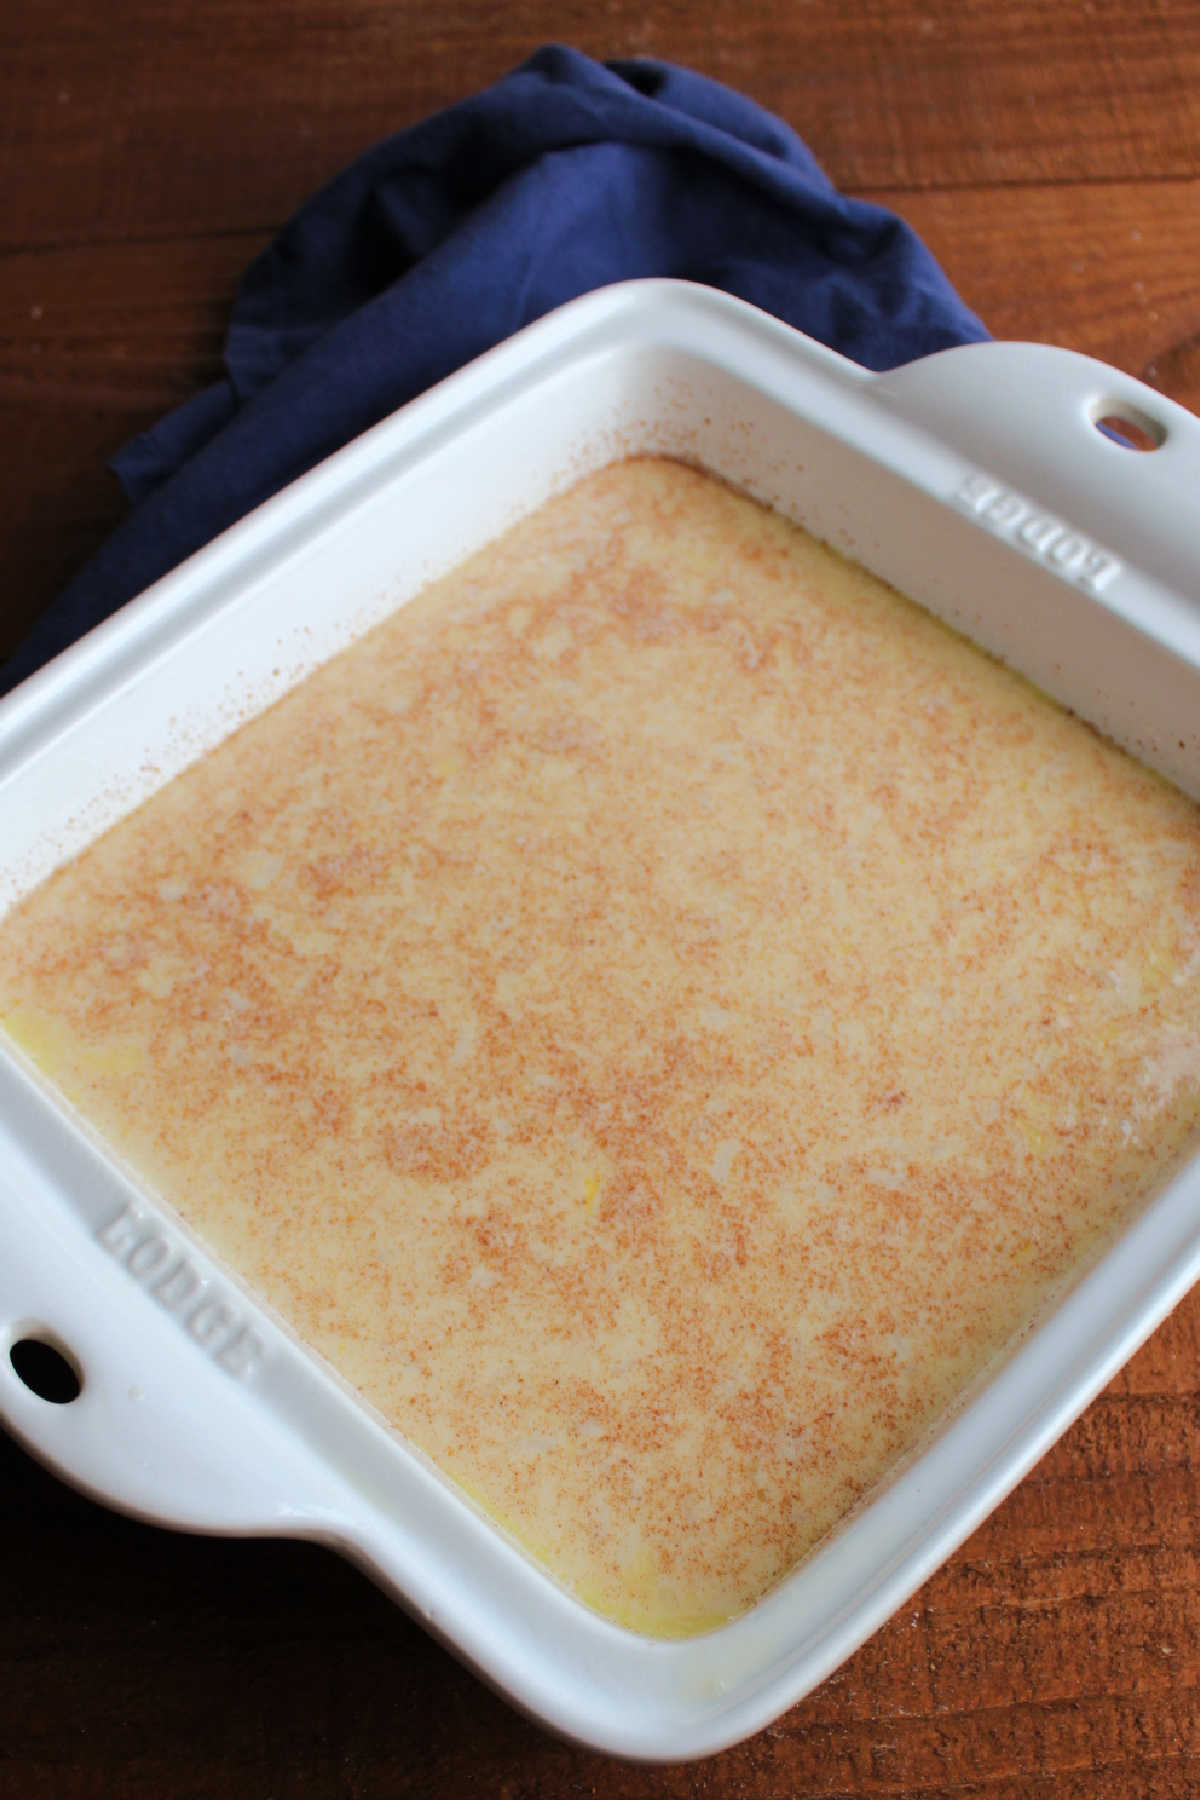 Ready-to-bake rice pudding mix skillet.